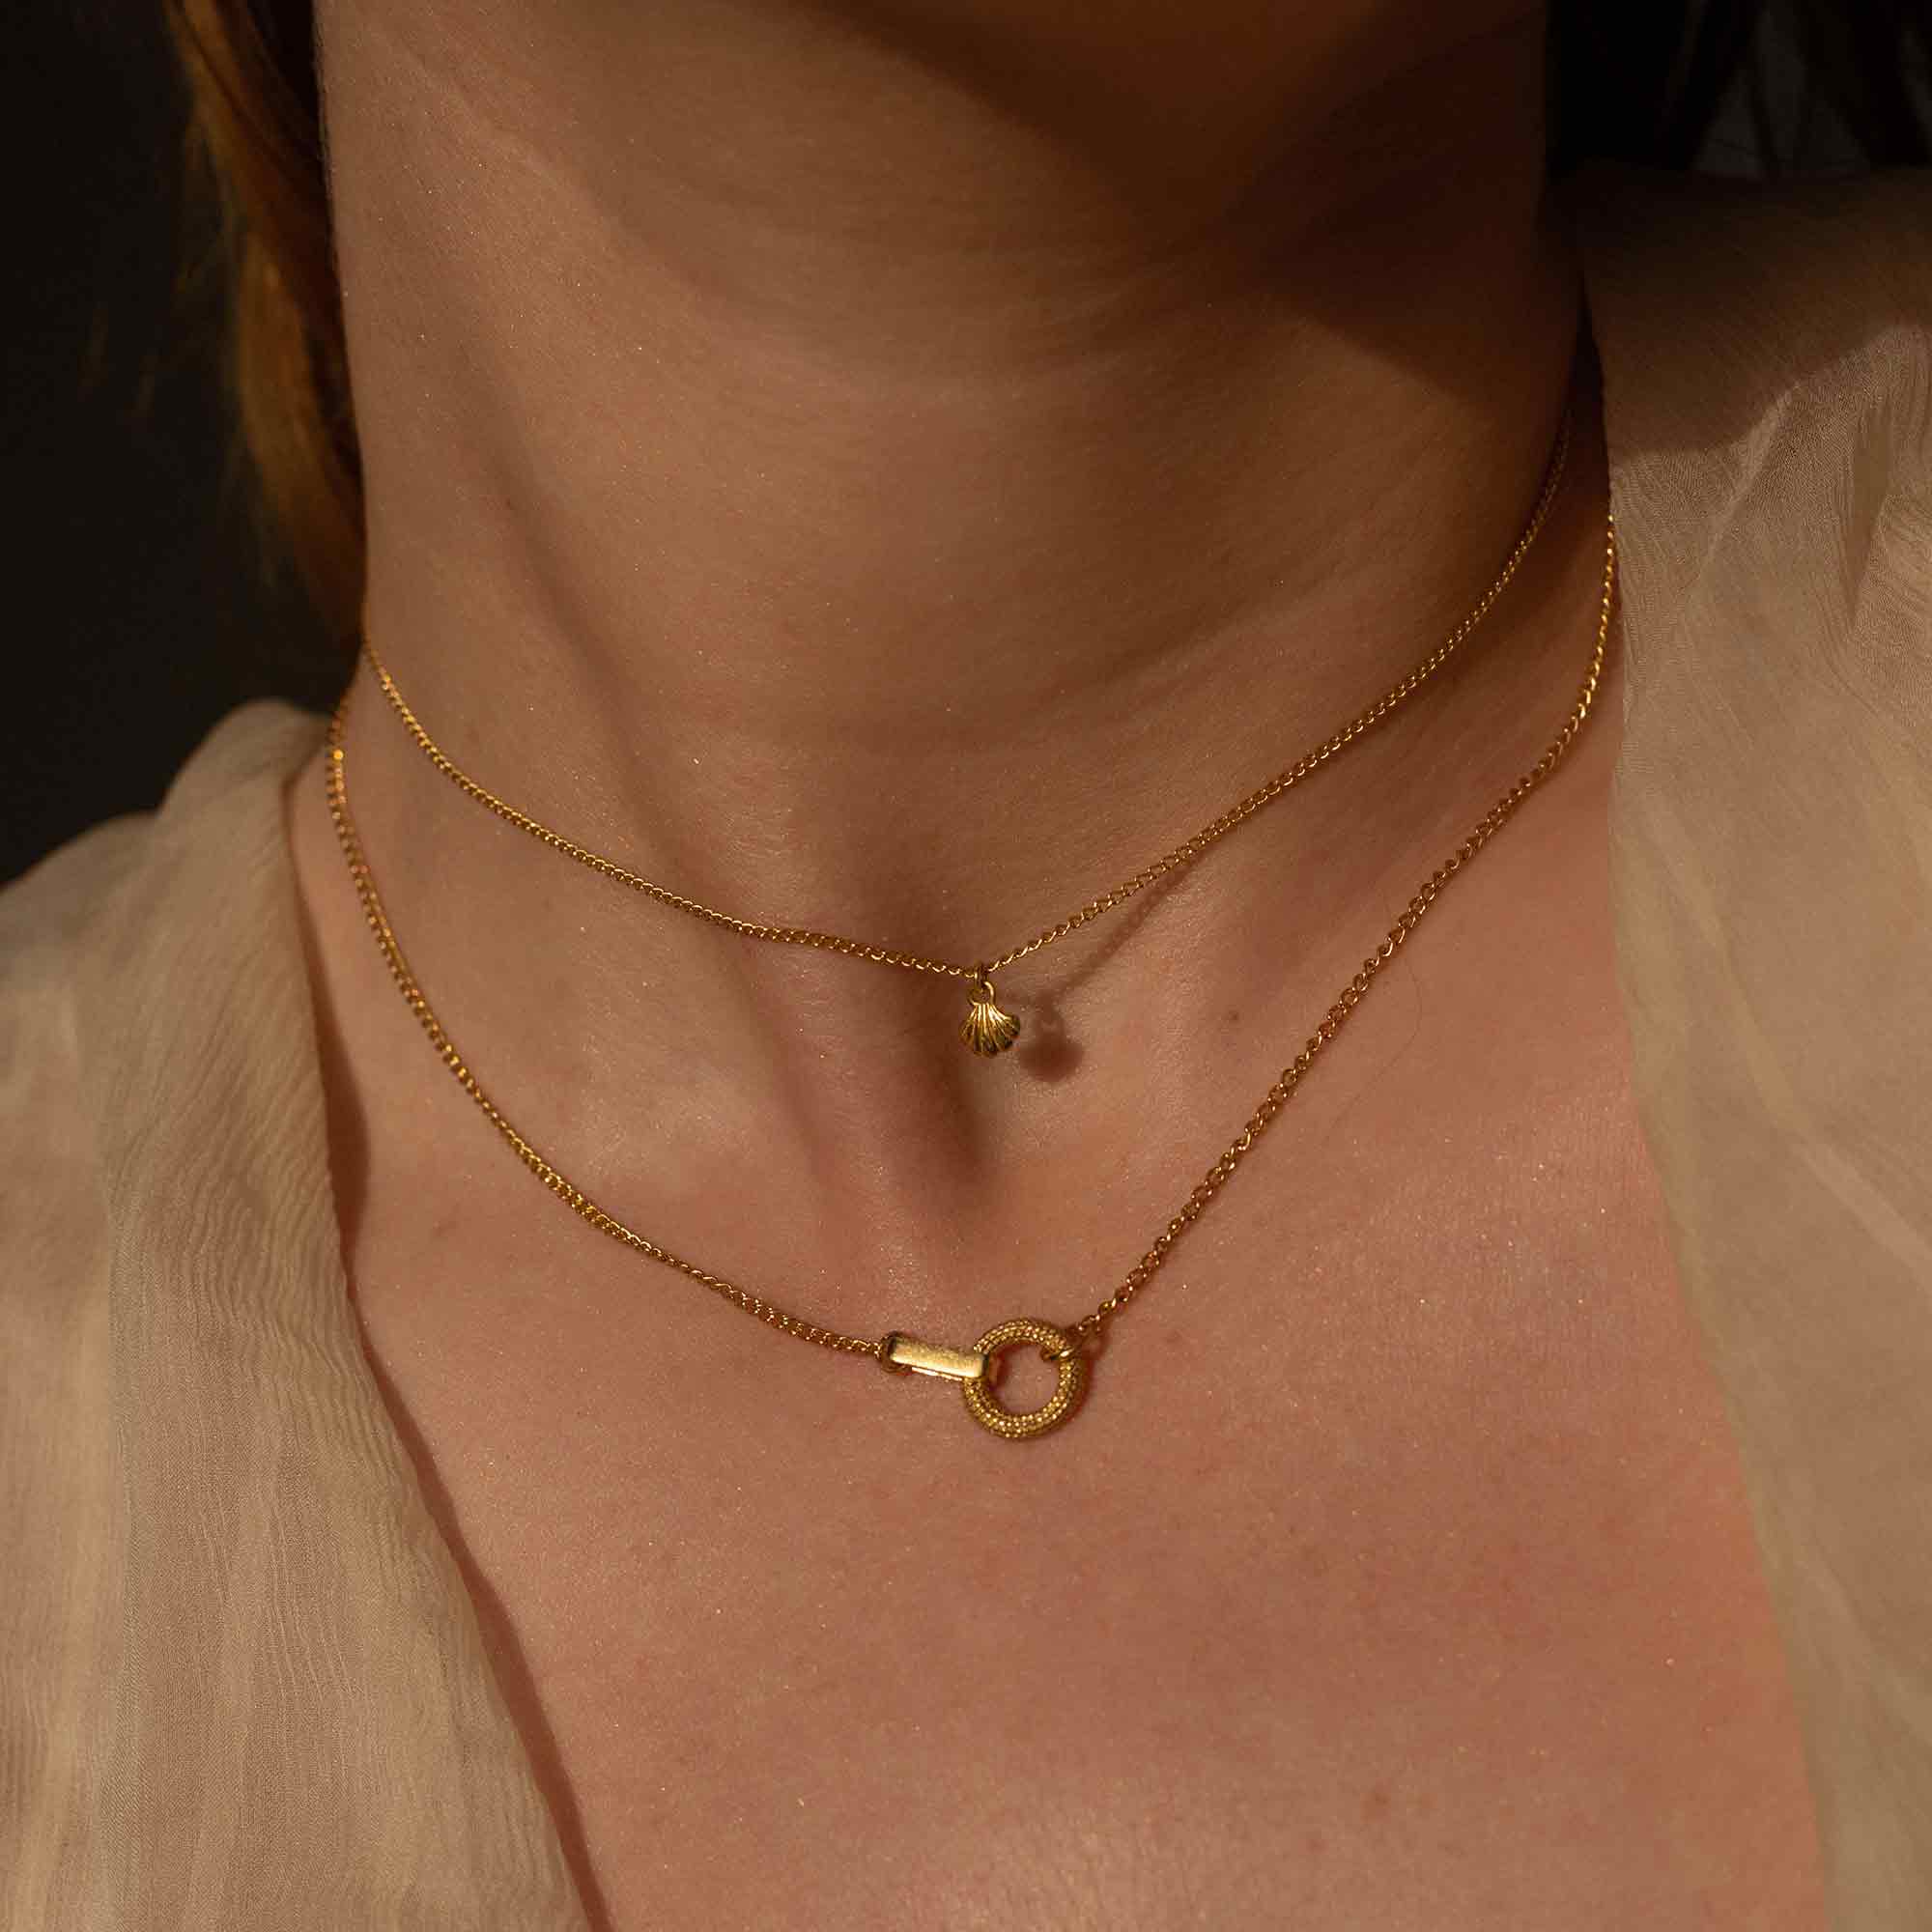 Model wearing 2 necklaces, one is the Tiny Wing gold shell necklace